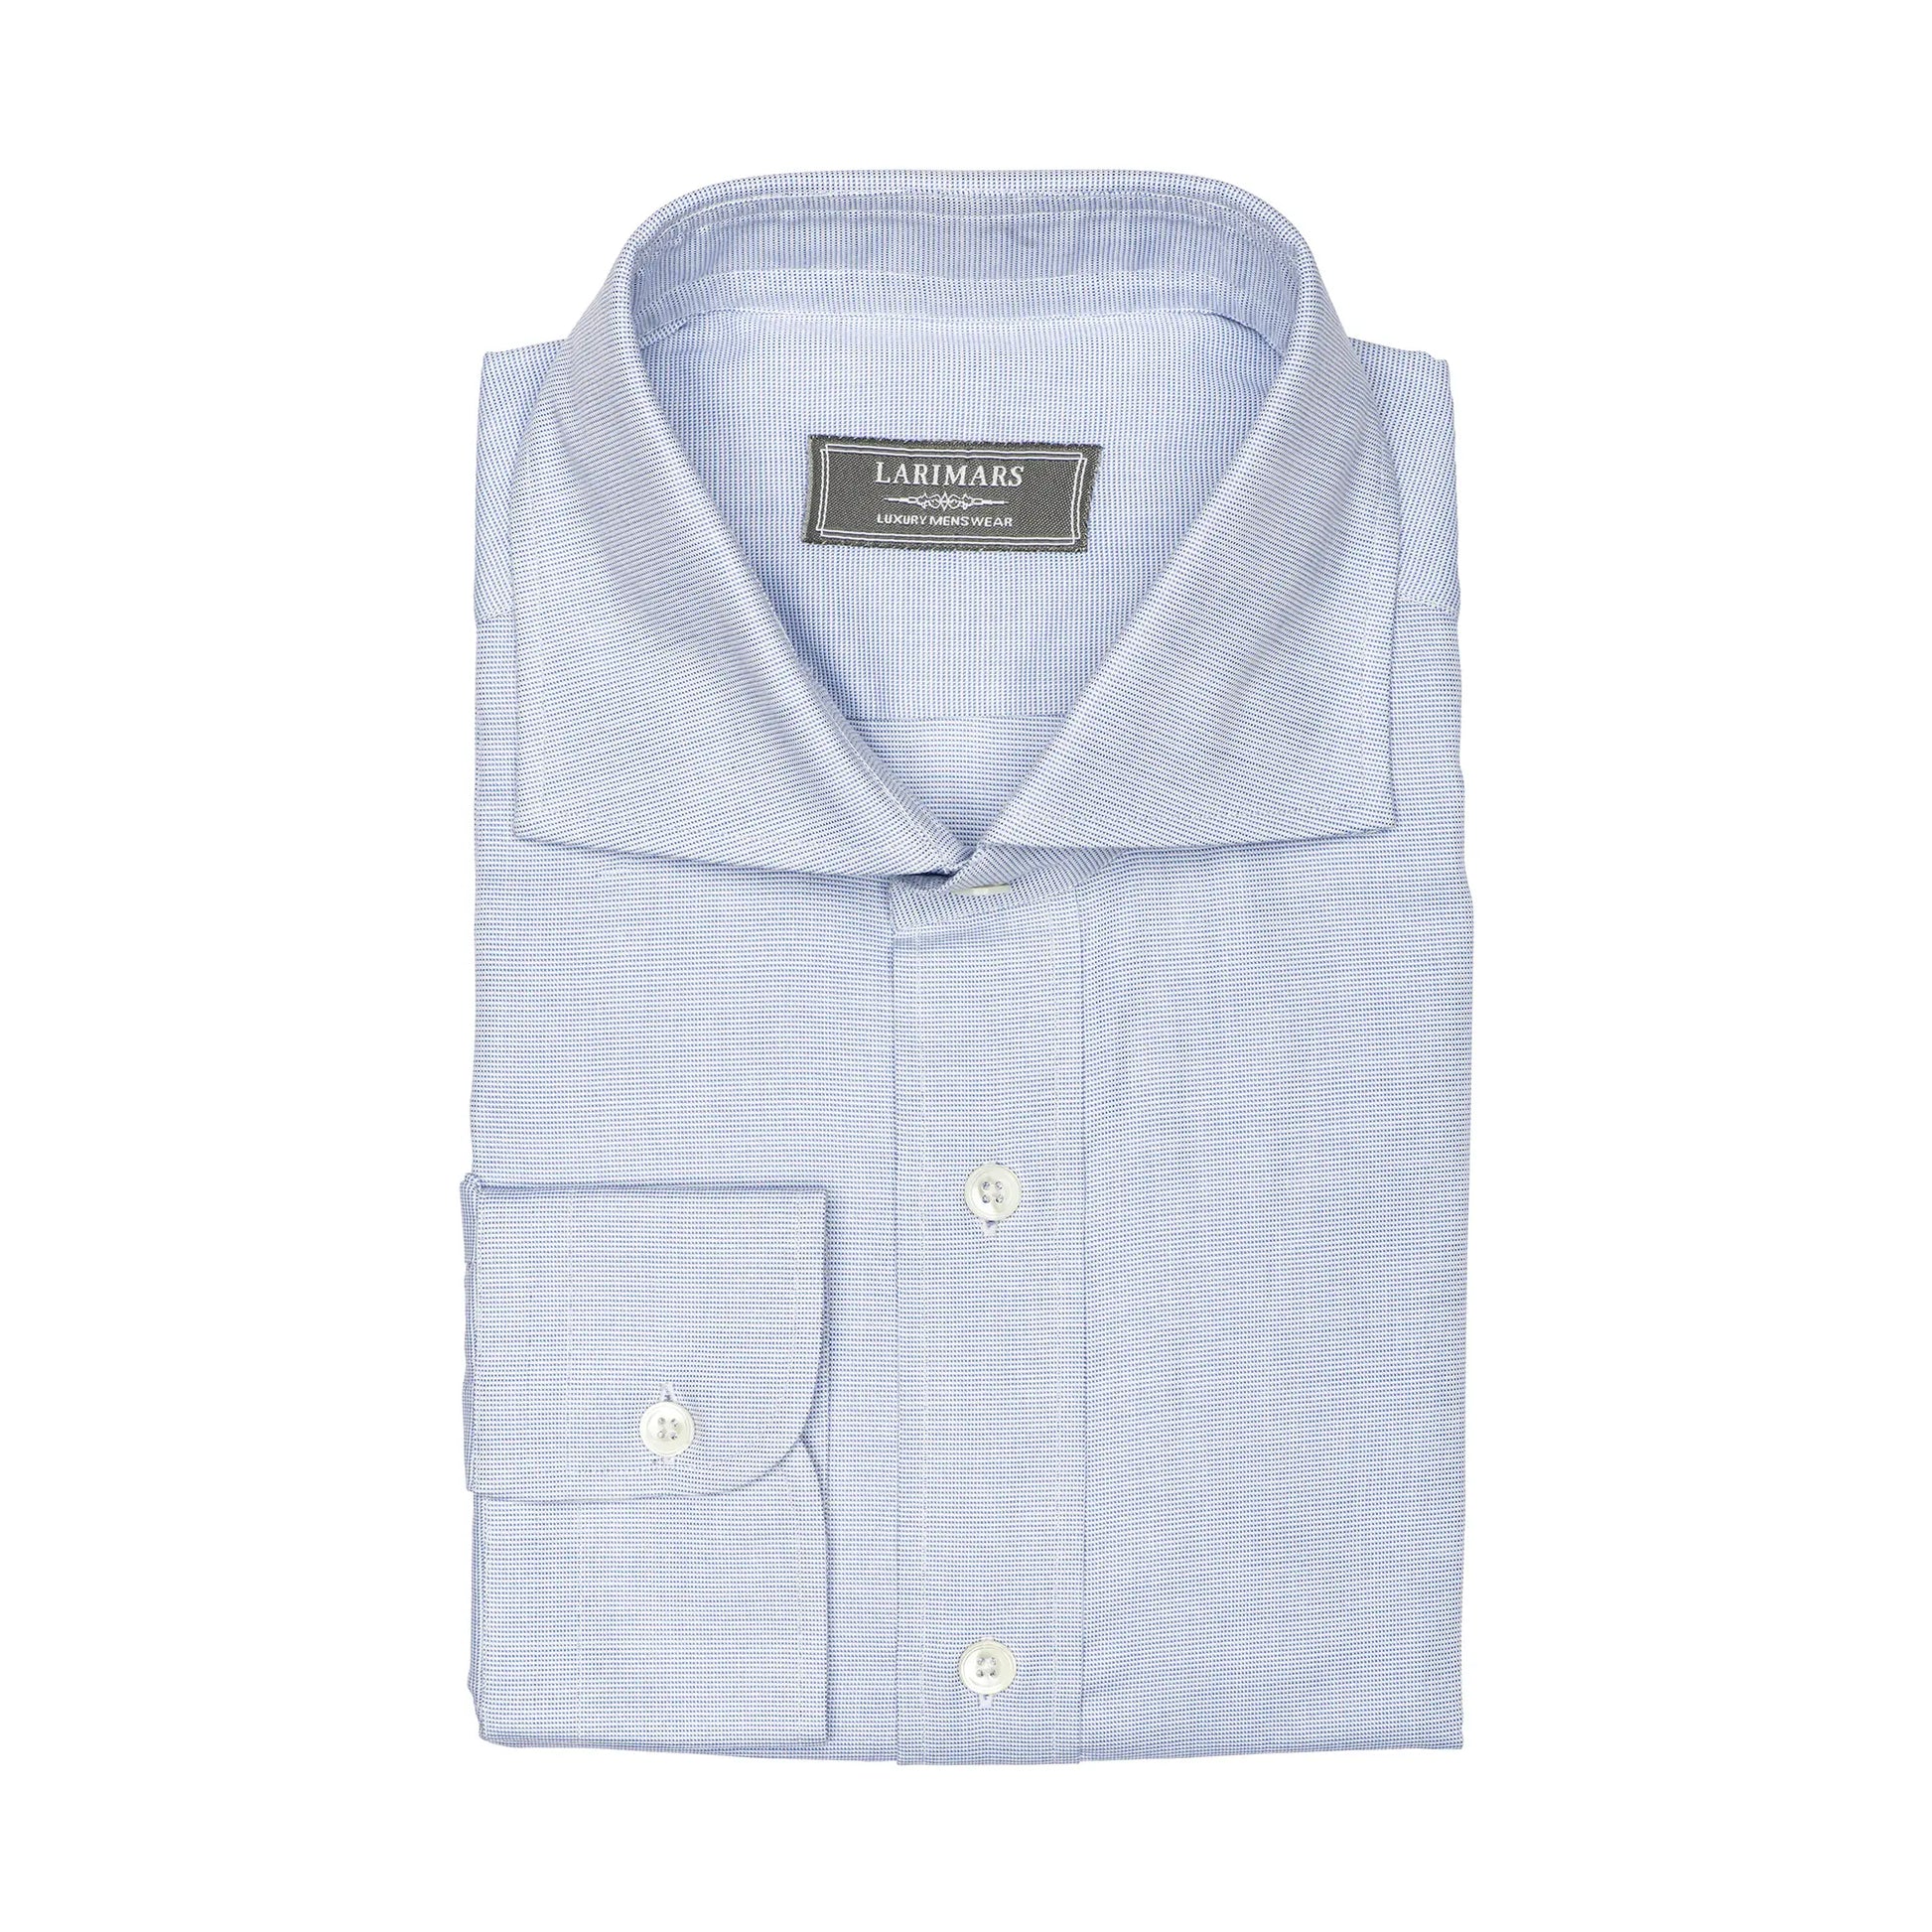 Light Blue End on End - Larimars Clothing Men's Formal and casual wear shirts